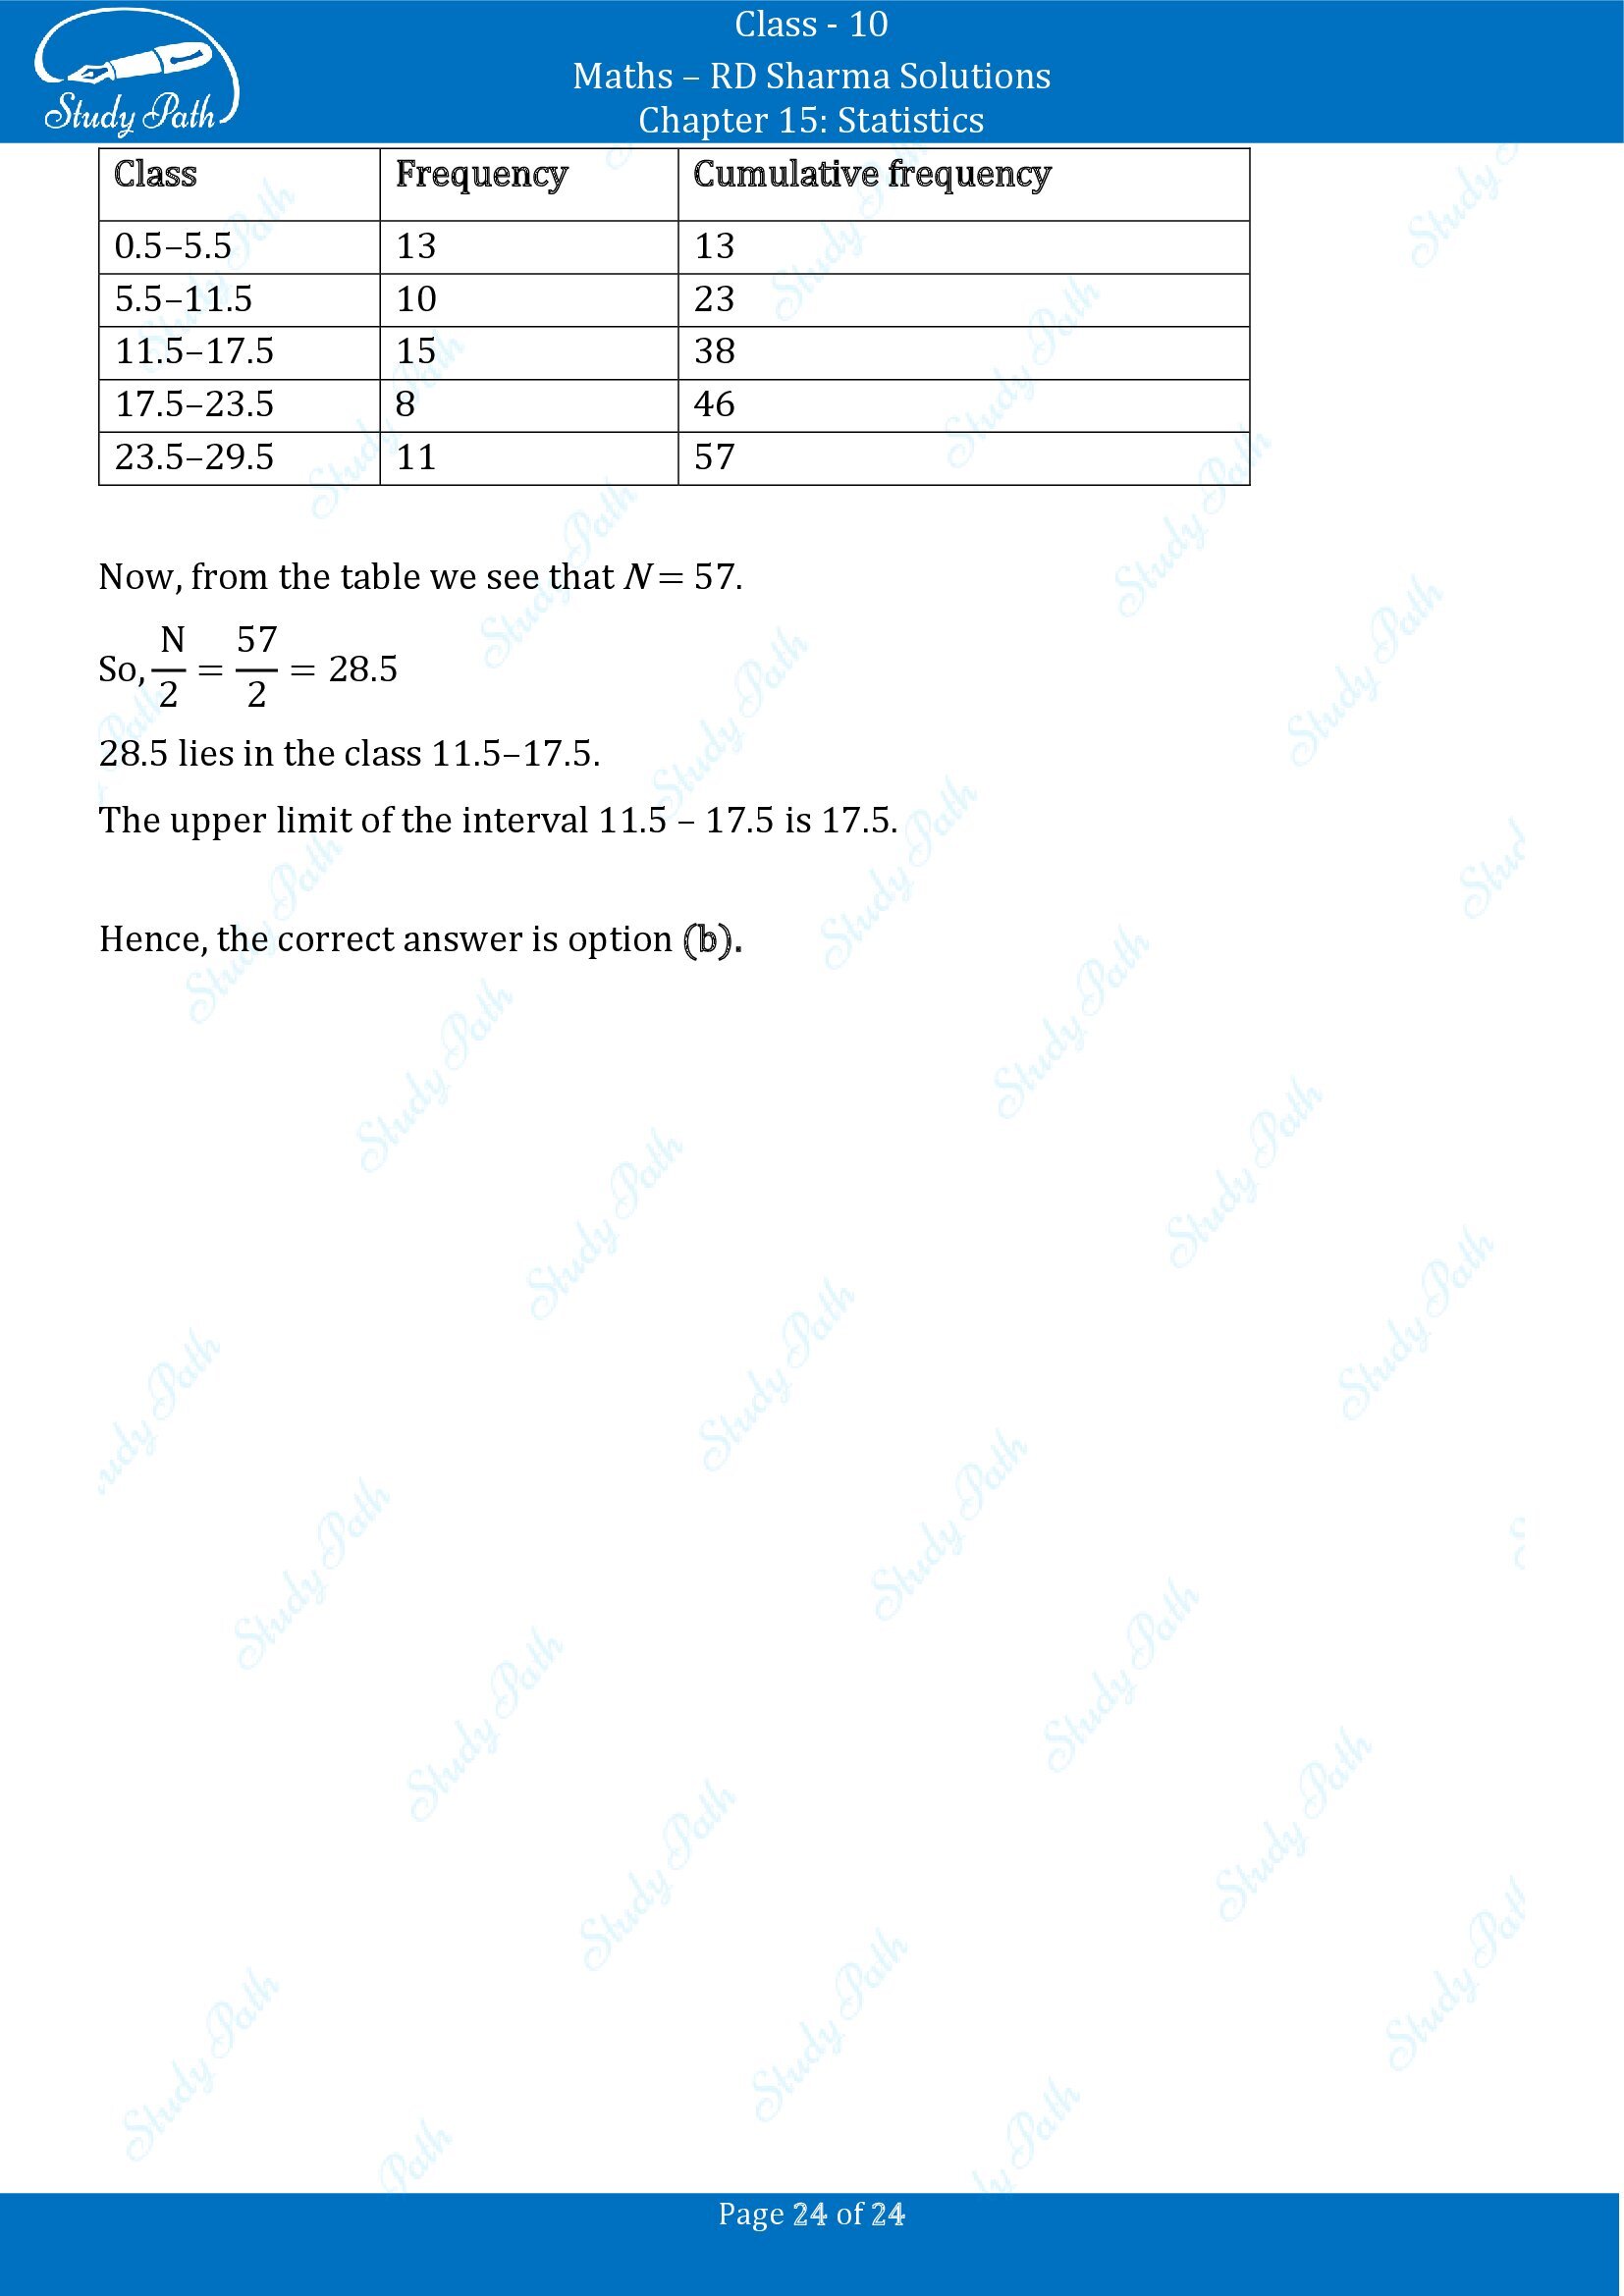 RD Sharma Solutions Class 10 Chapter 15 Statistics Multiple Choice Question MCQs 00024